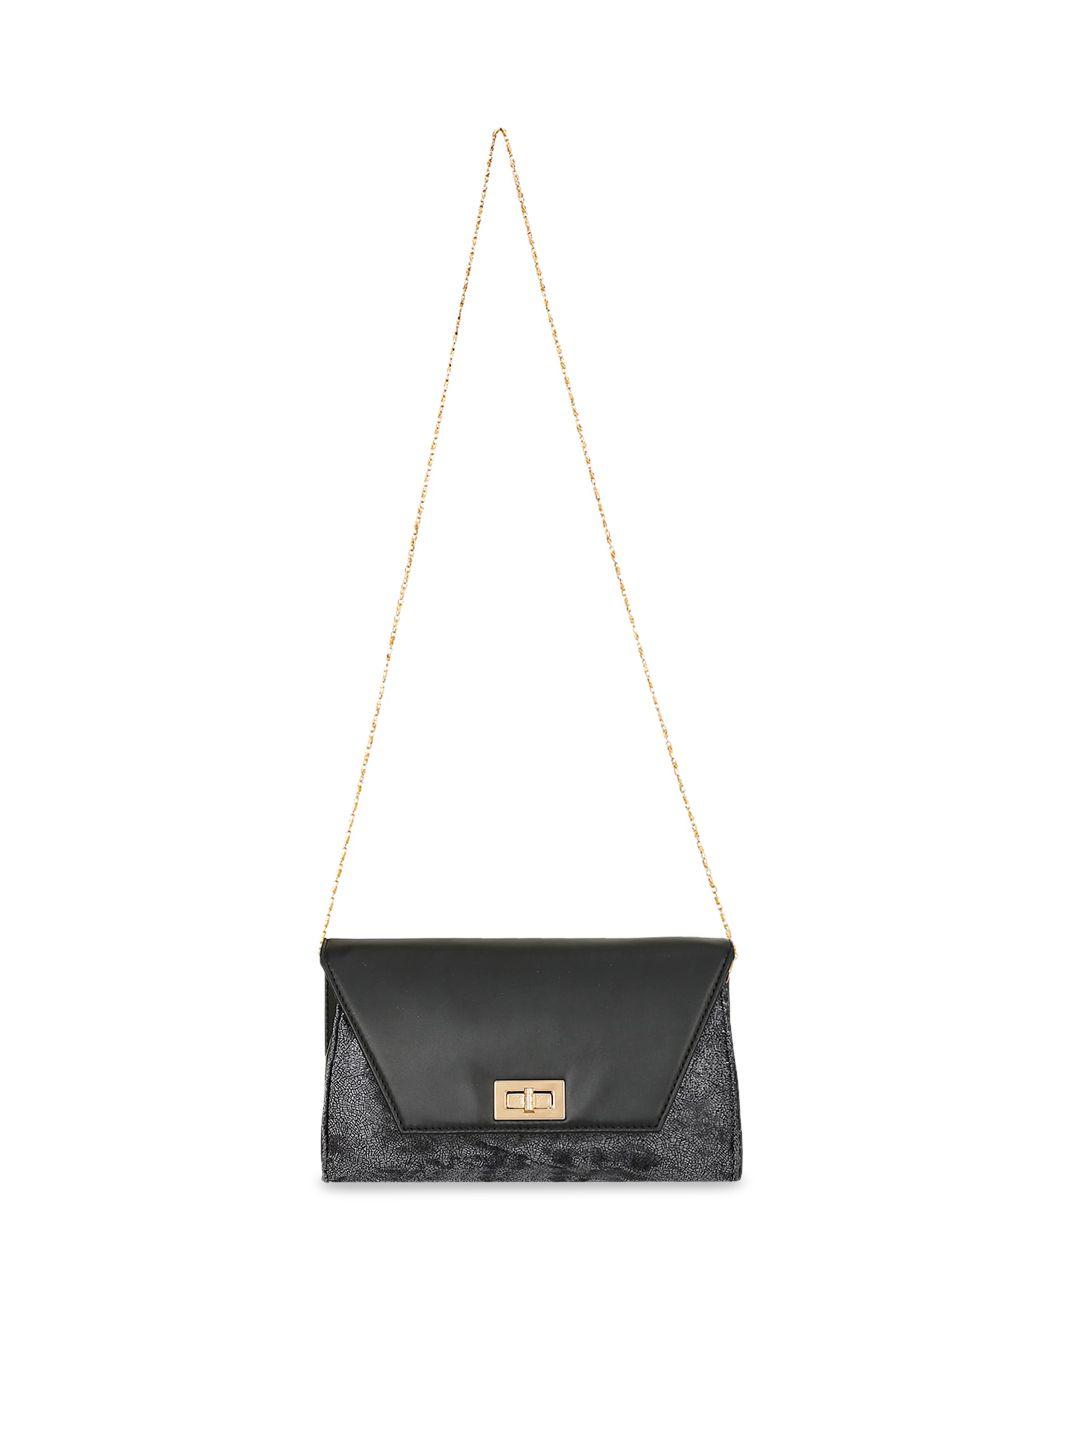 berrypeckers black structured sling bag with tasselled